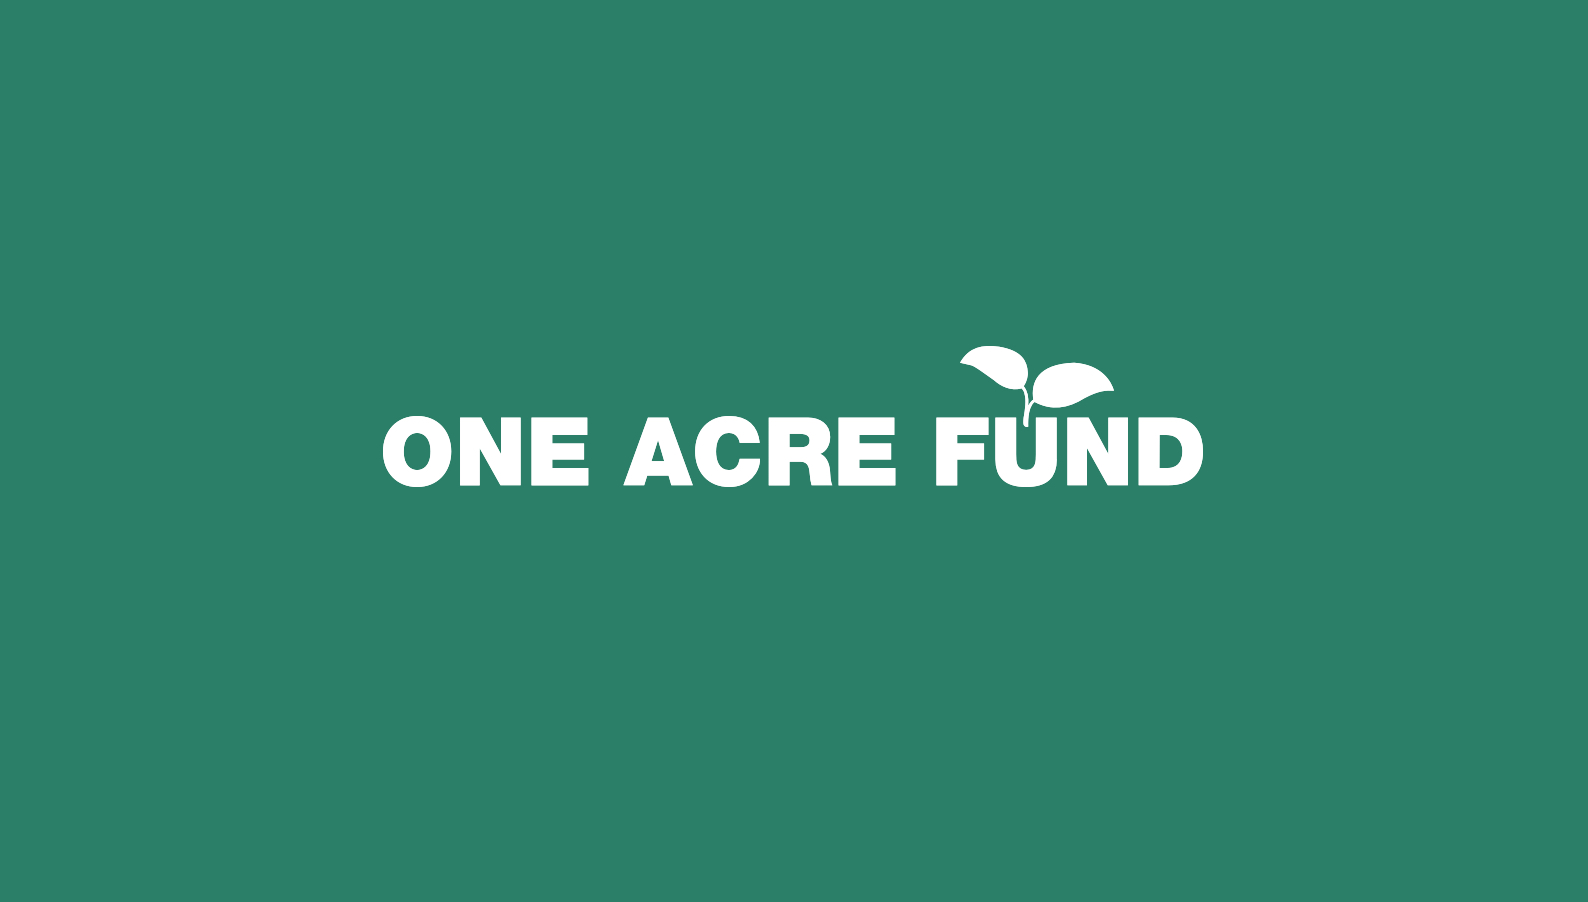 Recruitment: Apply For One Acre Fund Recruitment 2022